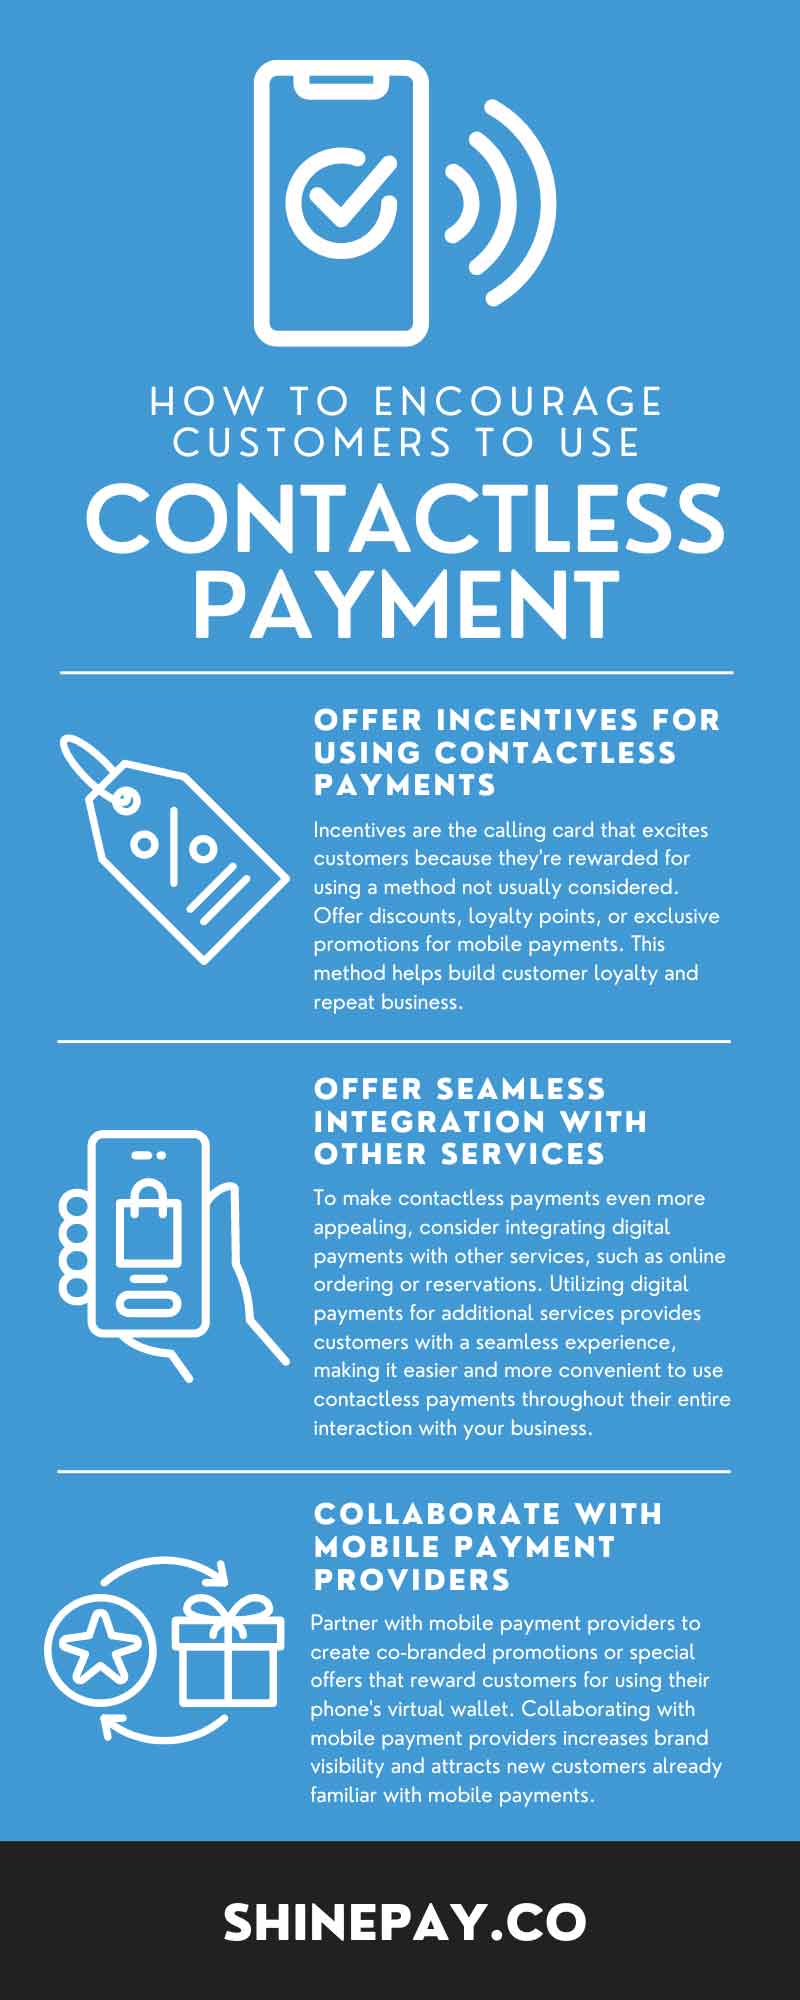 How To Encourage Customers To Use Contactless Payment